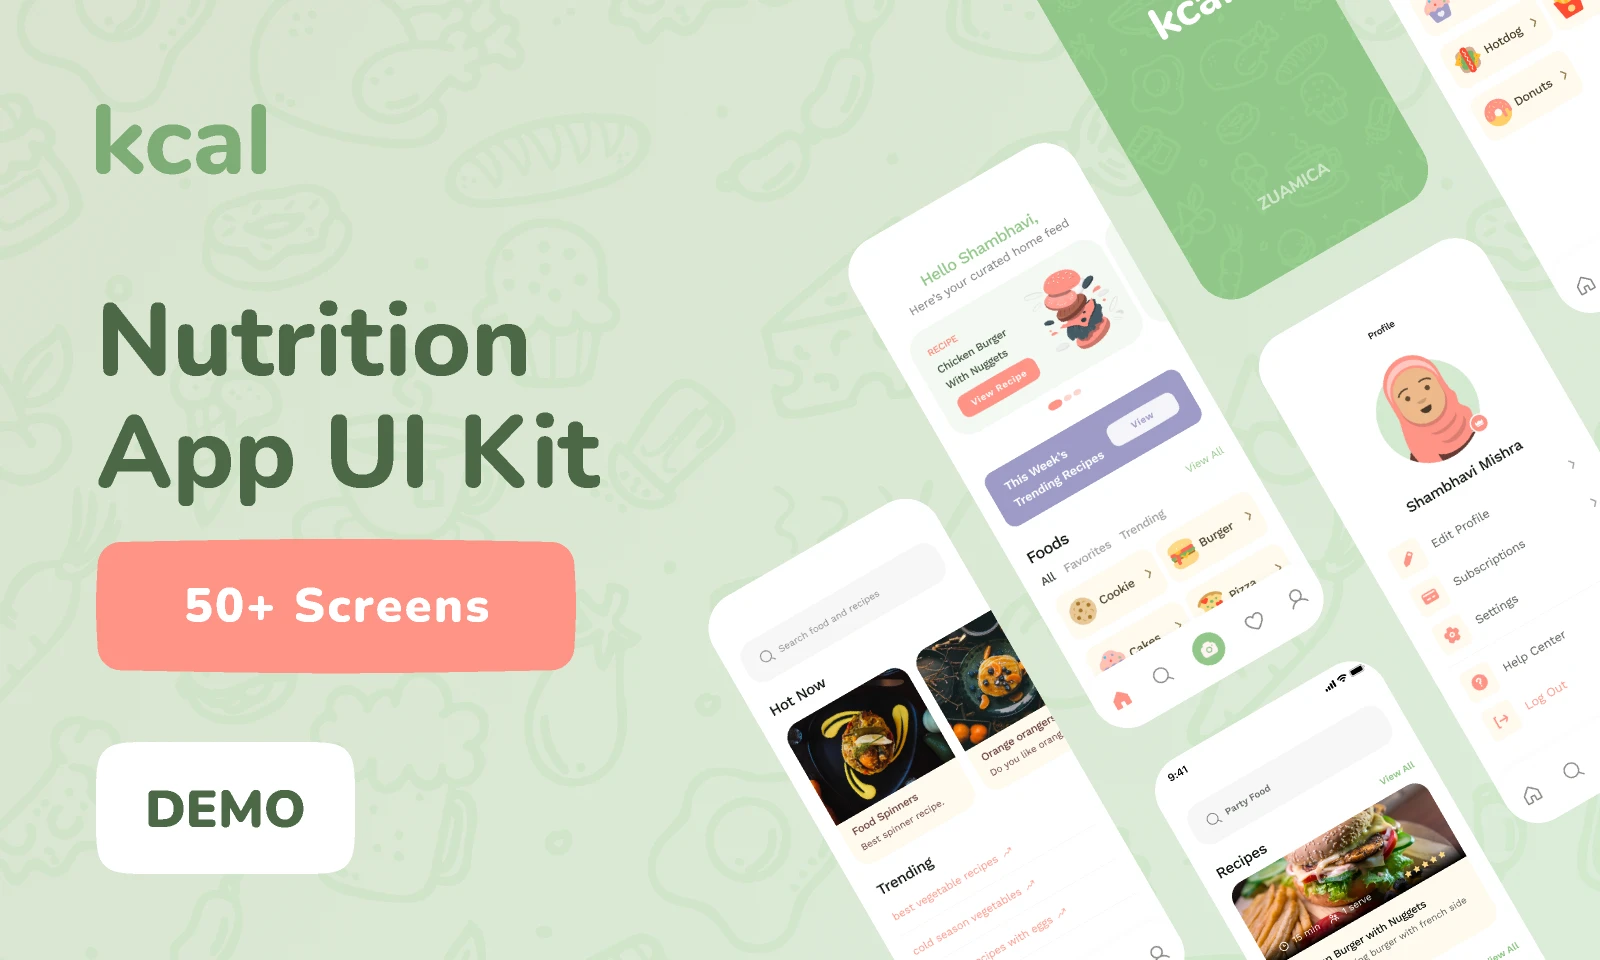 kCal - Nutrition App UI Kit (DEMO) for Figma and Adobe XD